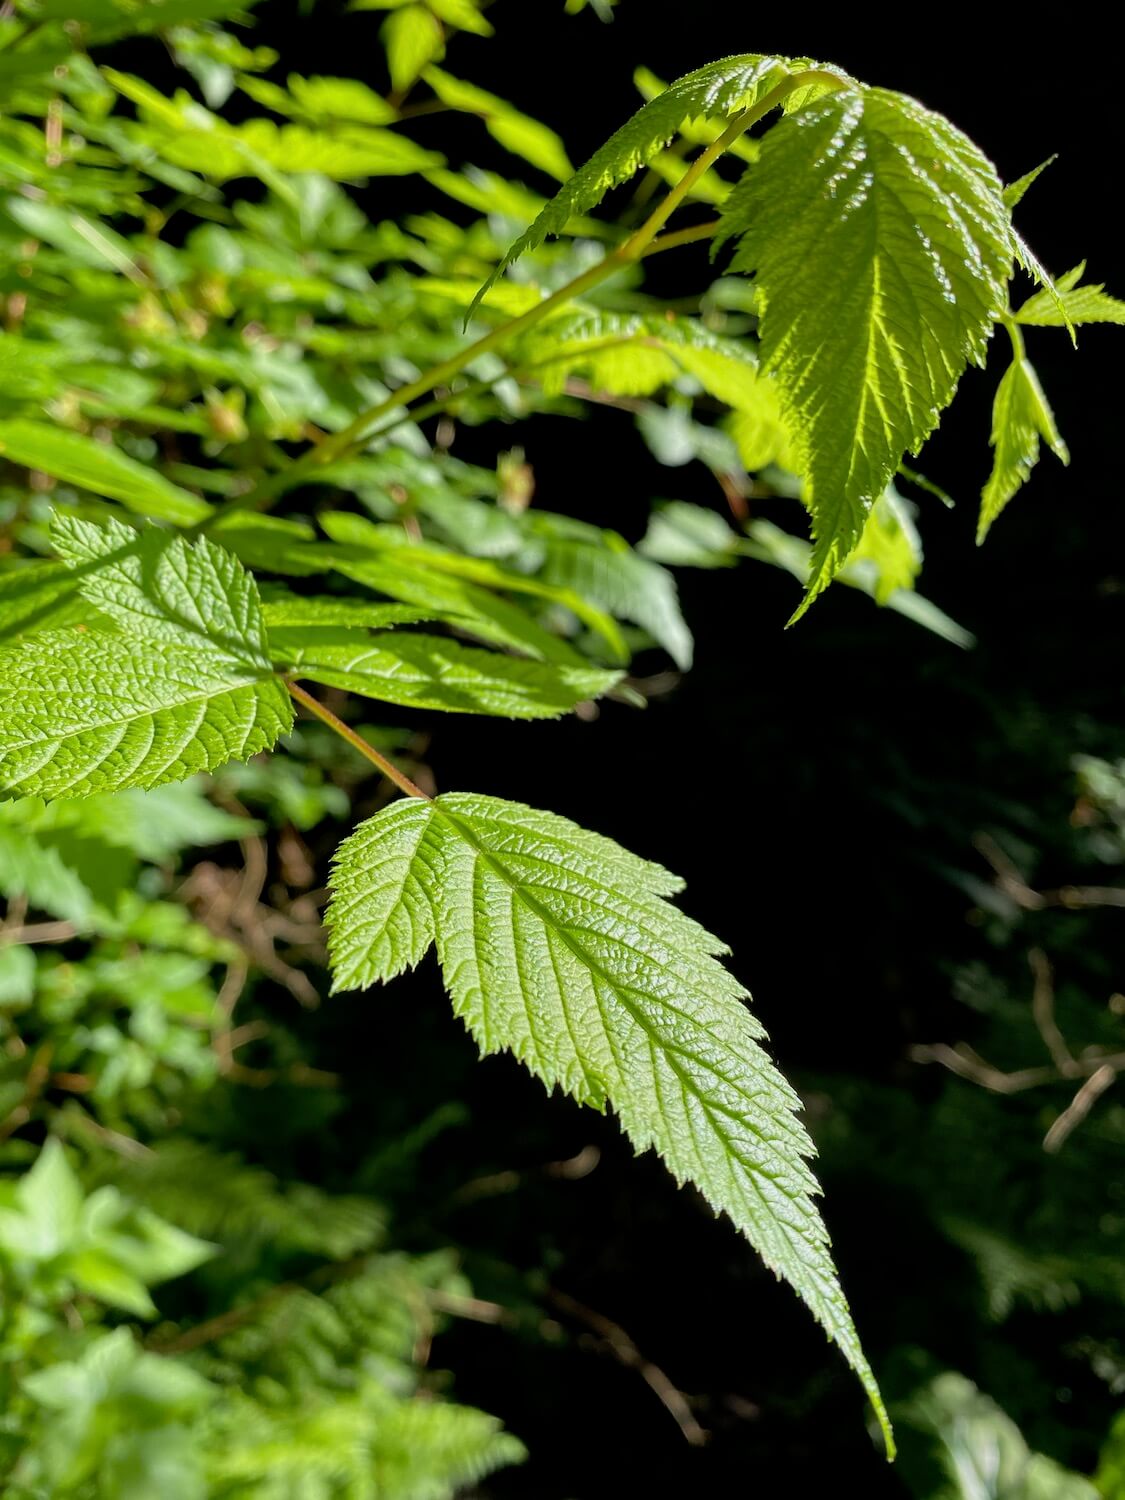 A branch of red current coming to life with delicate green leaves. The veins on the leaves are very intricate and distinct and the dark background of the deep forest adds contrast.